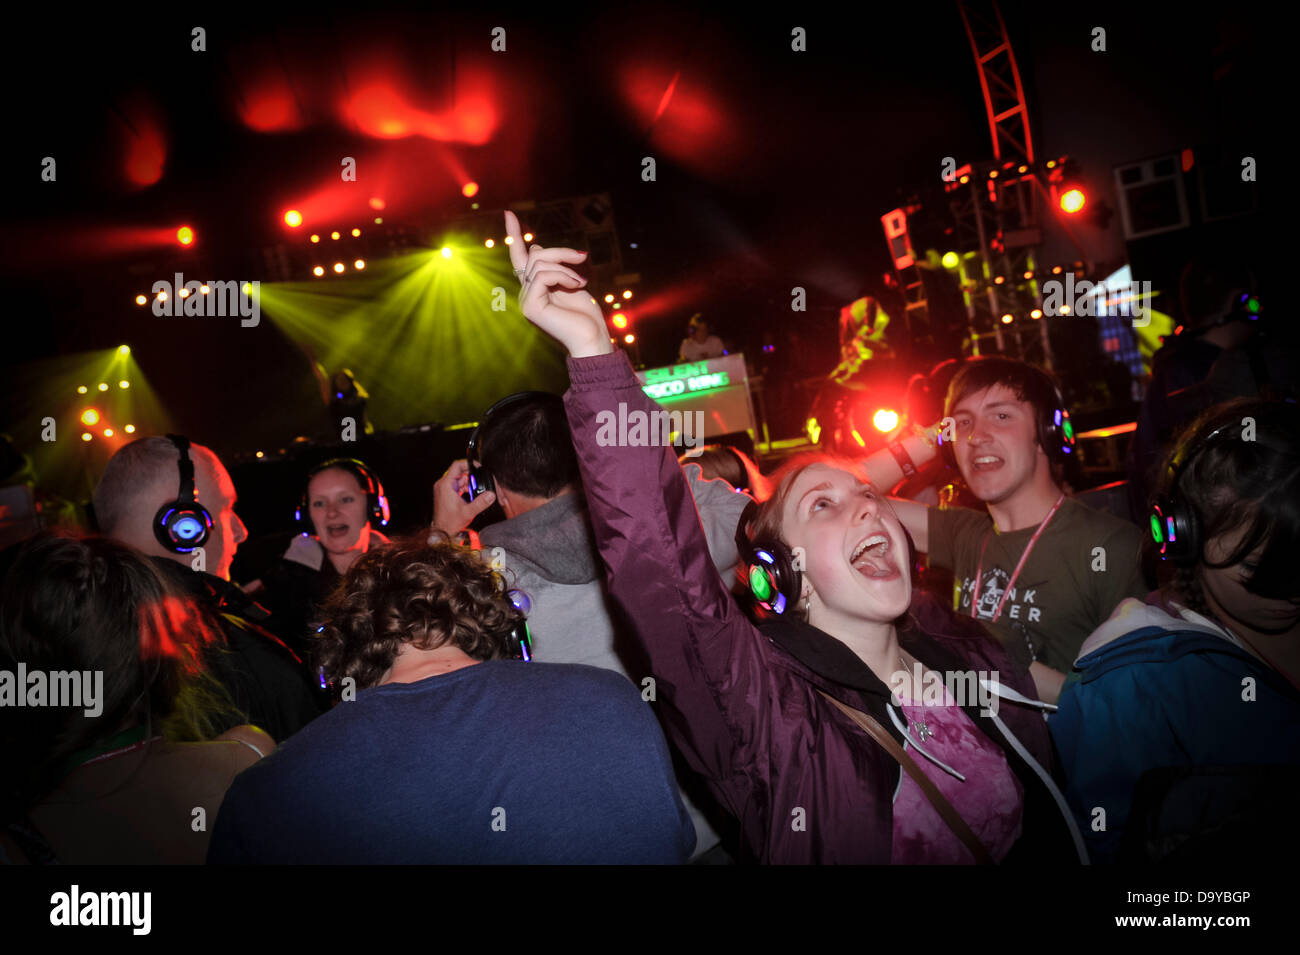 Glastonbury, UK. 28th June 2013. GLASTONBURY MUSIC FESTIVAL UK  2013 Festival goers wearing headphone in the Silent disco tent where you can only hear the songs through the headphones. GLASTONBURY MUSIC FESTIVAL PILTON, SOMERSET, ENGLAND, UK Credit:  Alistair Heap/Alamy Live News Stock Photo